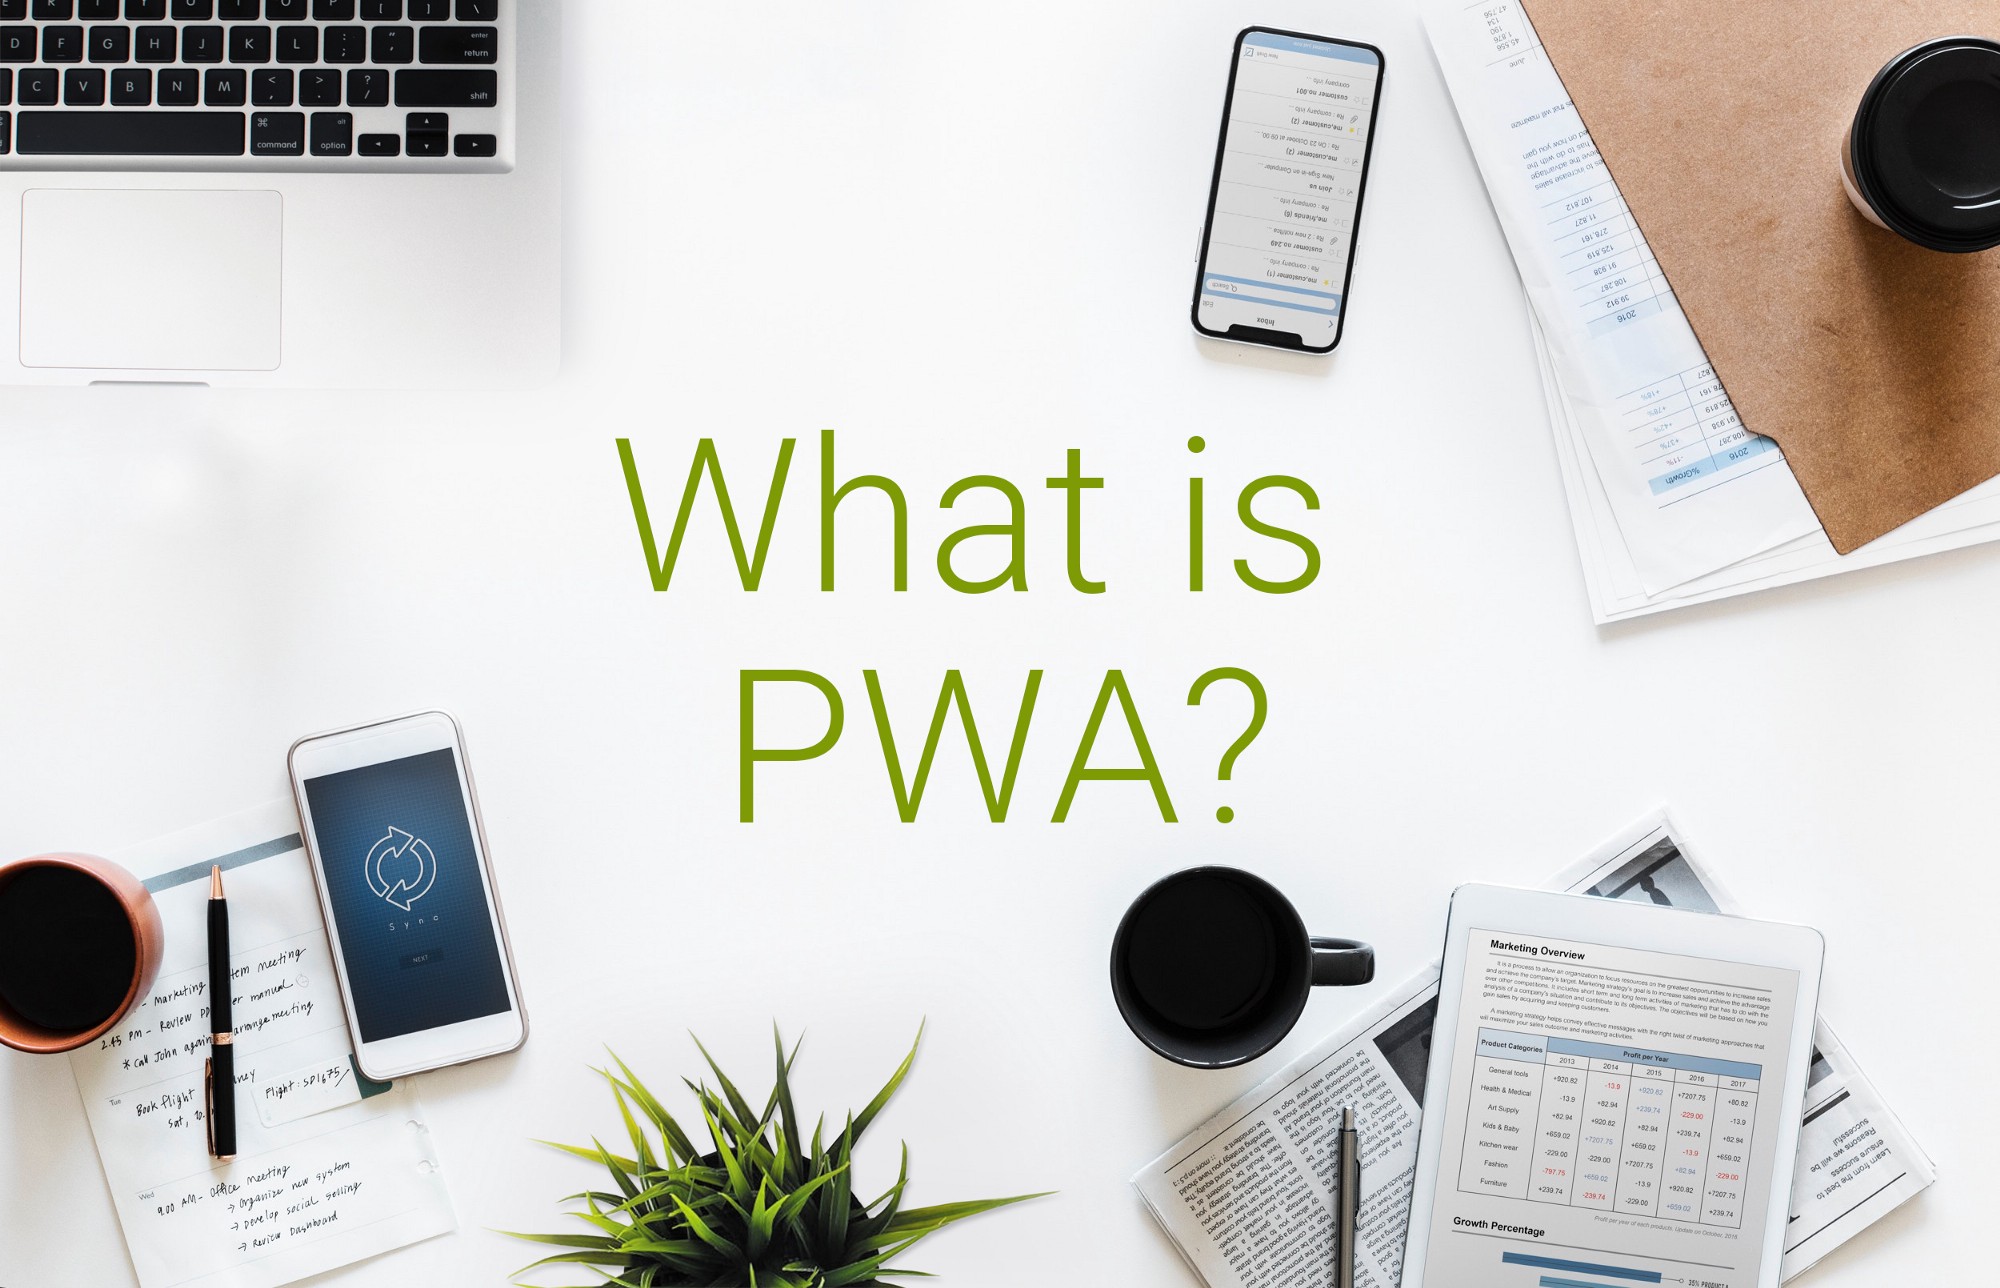 What is a PWA and why should you care?